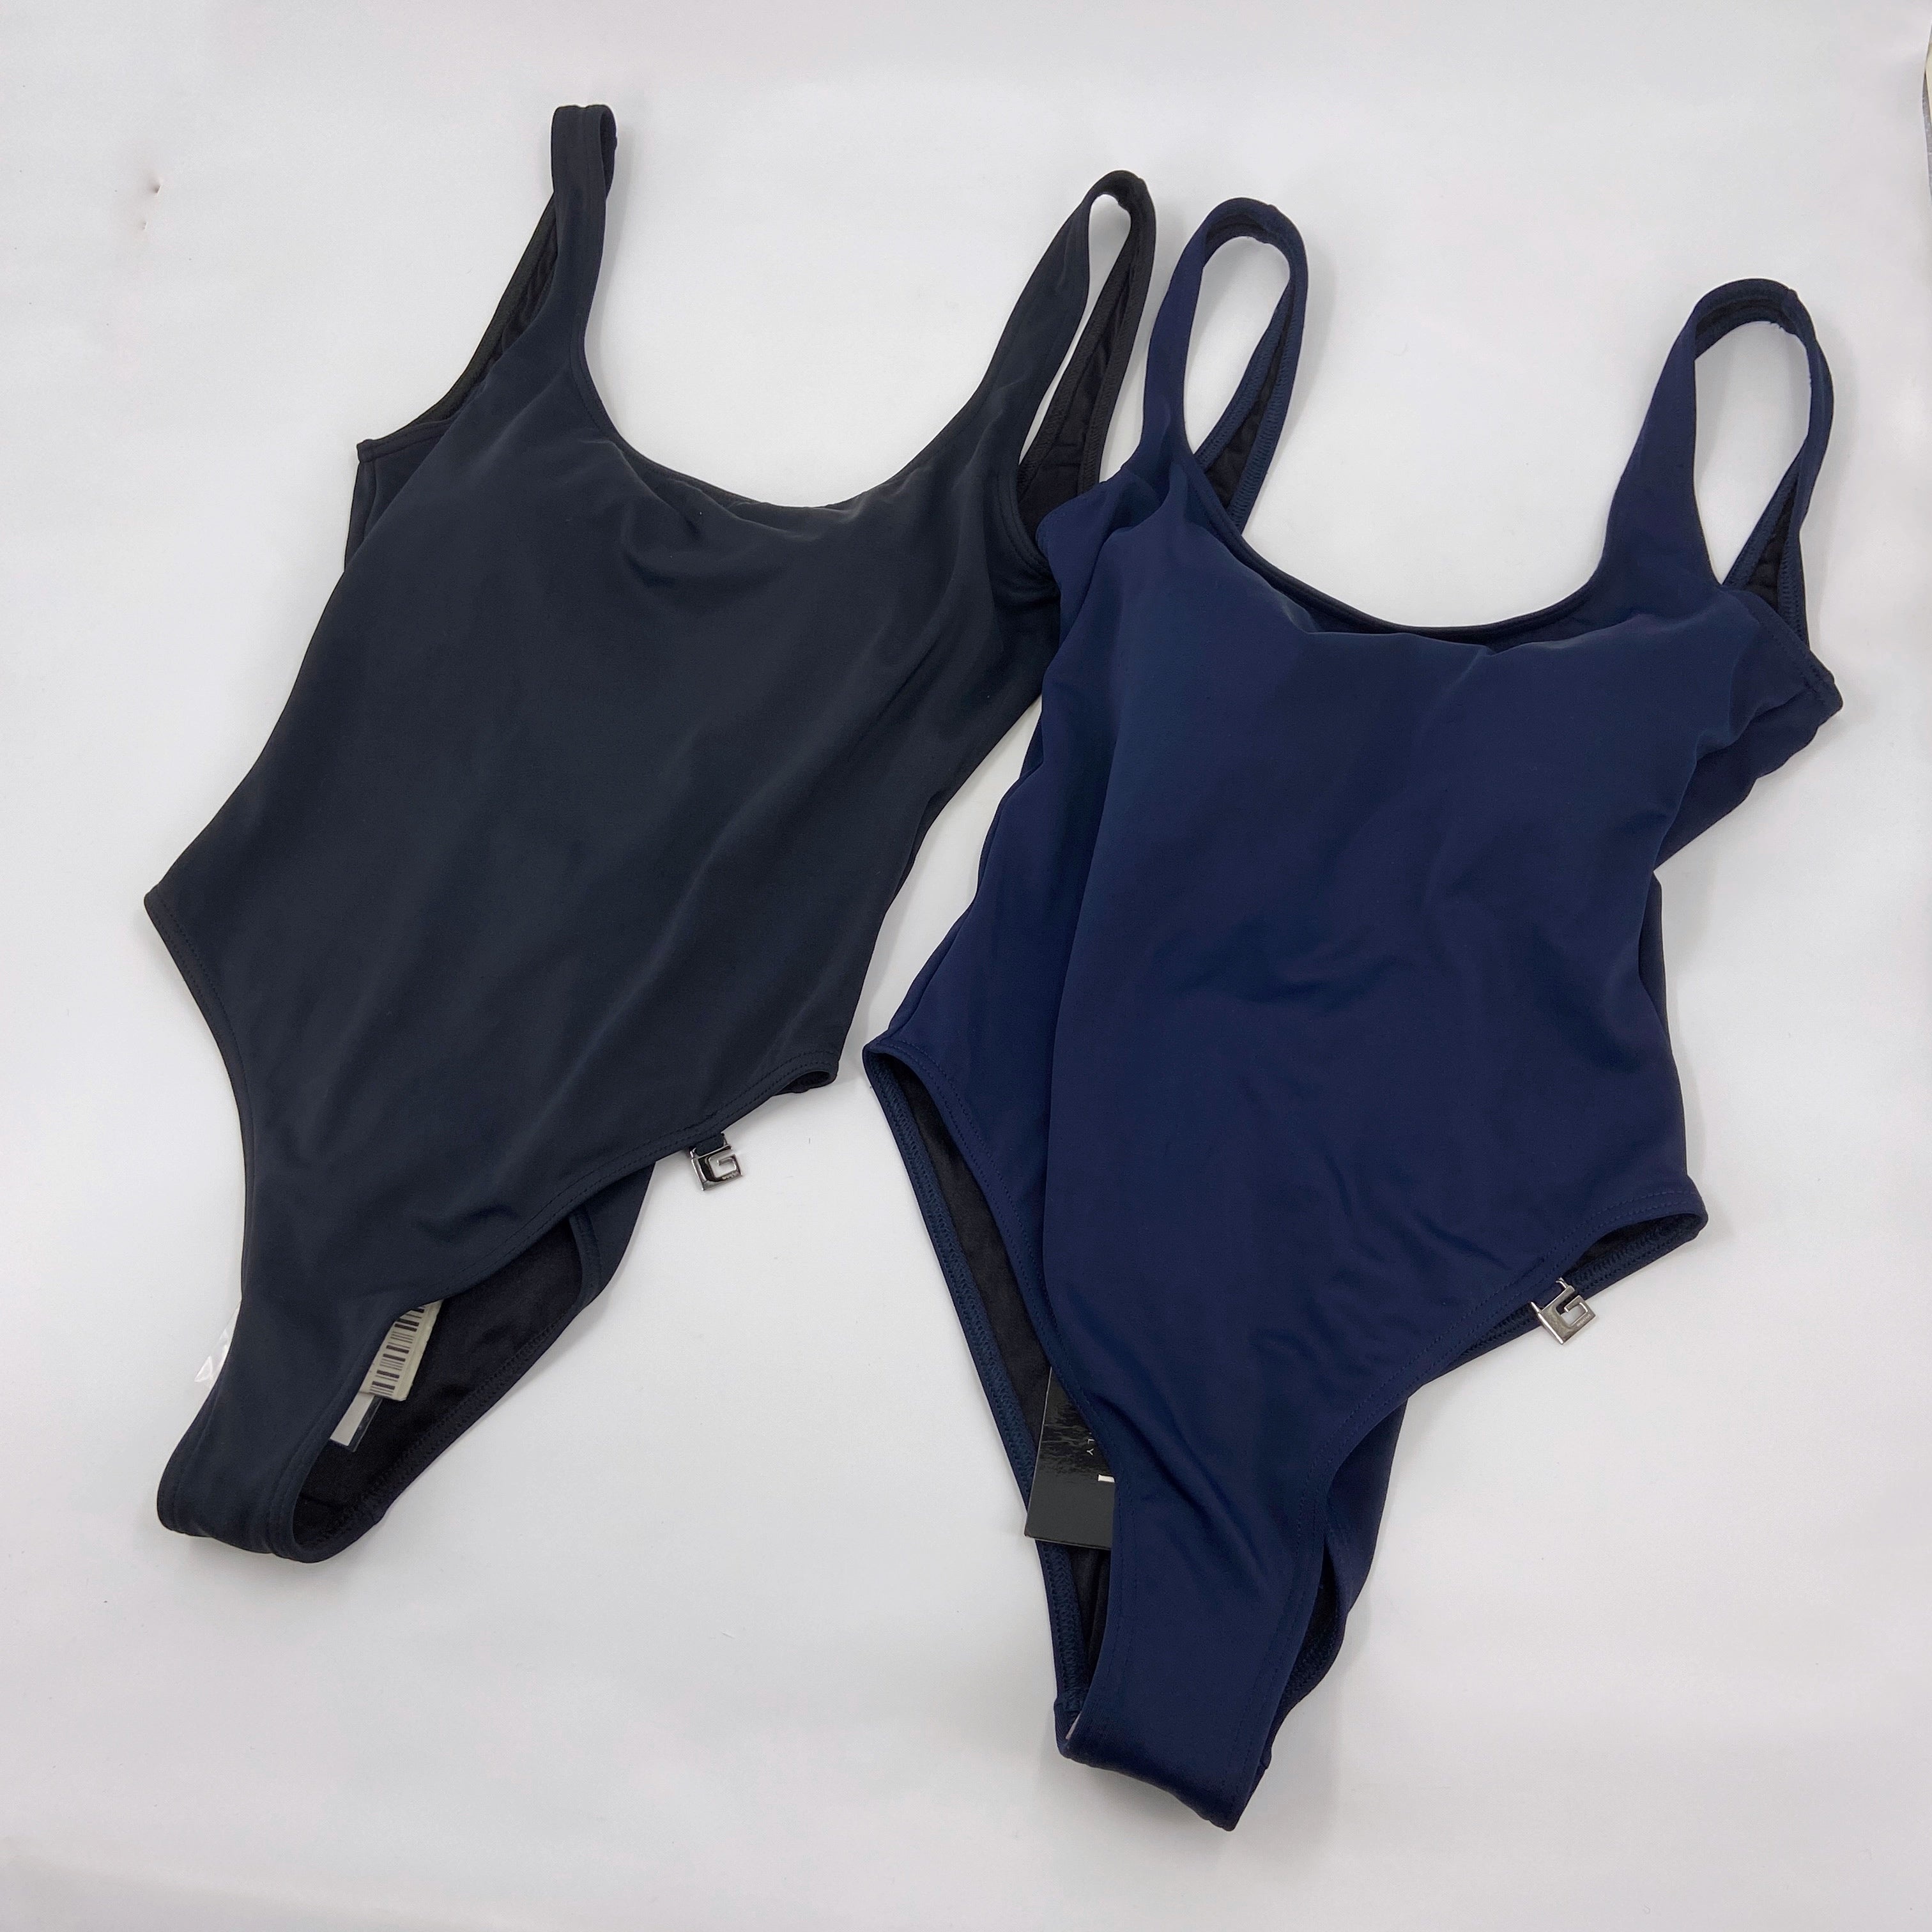 BWNT Gucci Spring 1999 Tom Ford Plunging Backless Navy One-Piece Swimsuit - 4